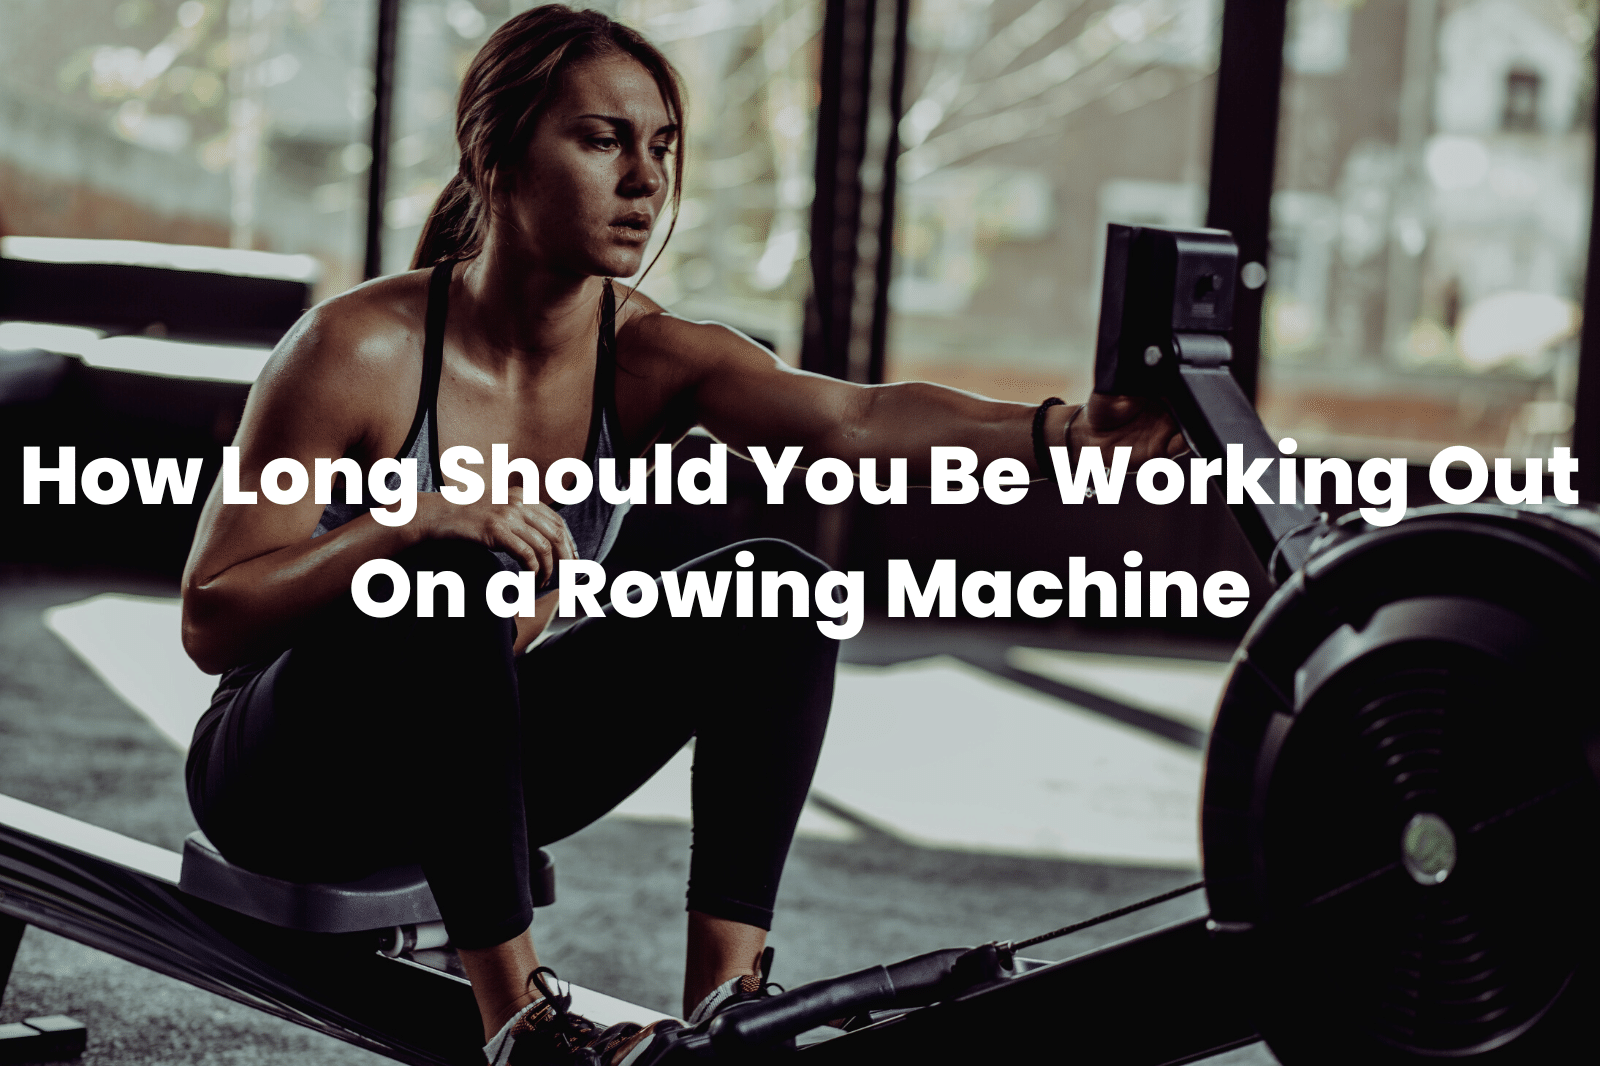 Working Out On a Rowing Machine